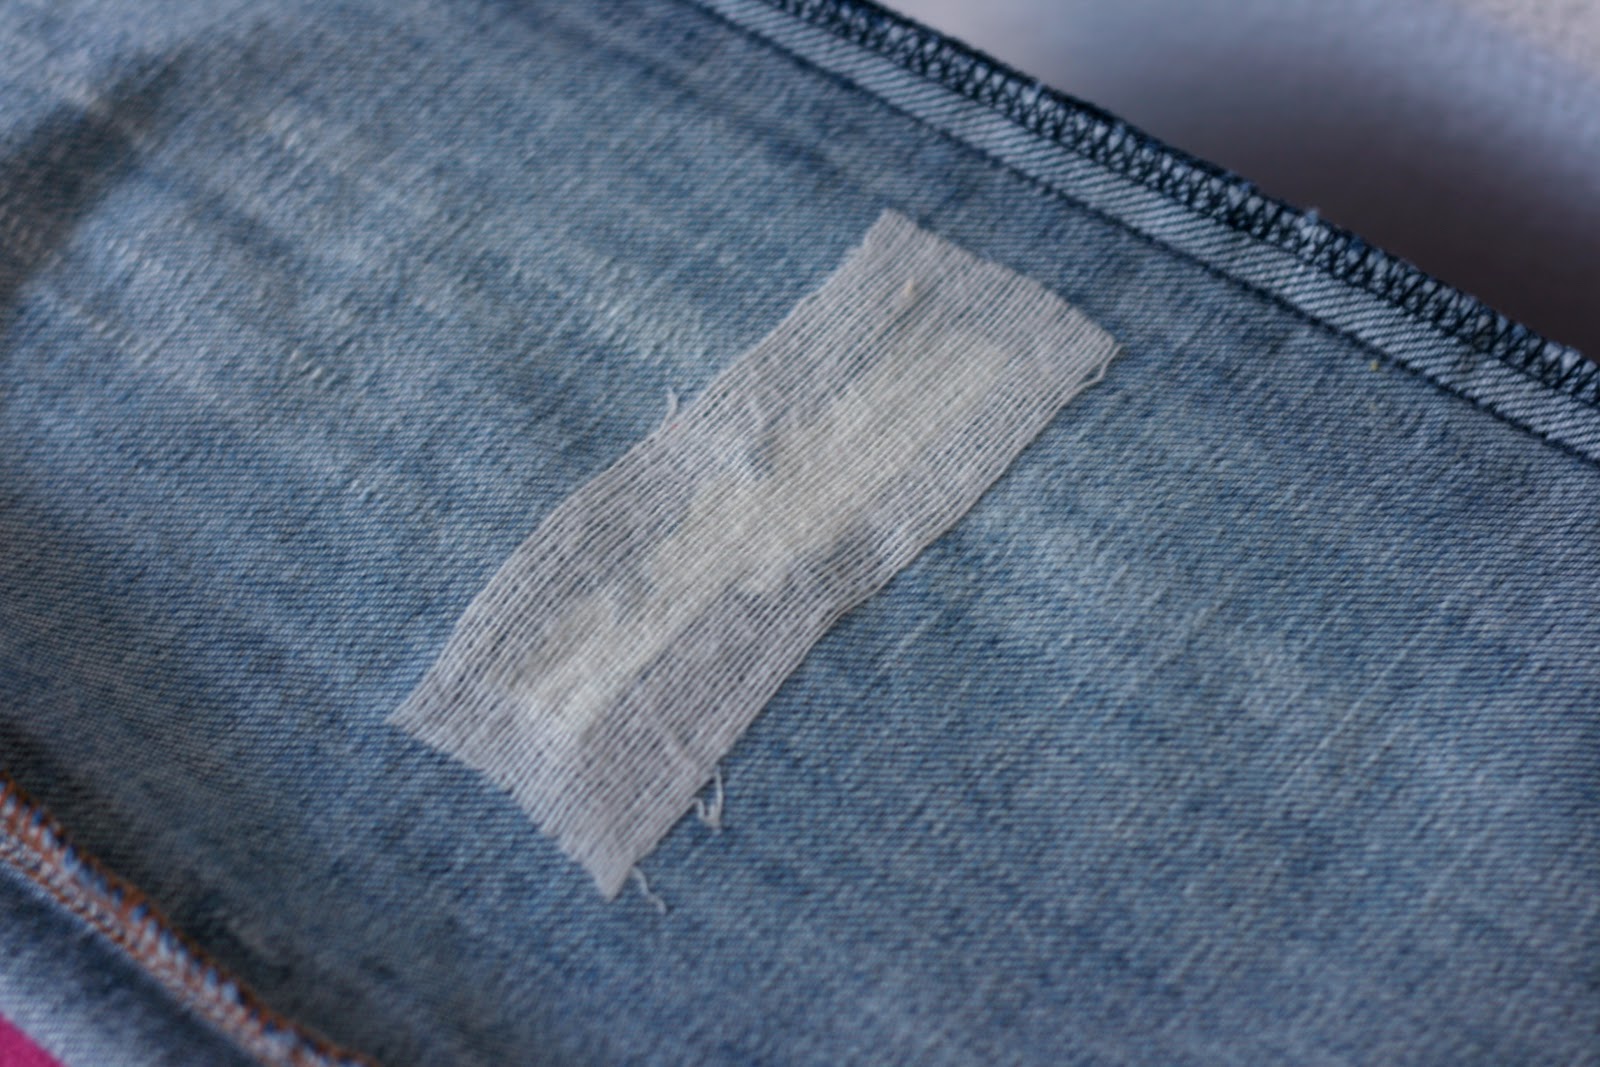 Tutorial update: How to mend jeans when the holes are in the knees / Create  / Enjoy